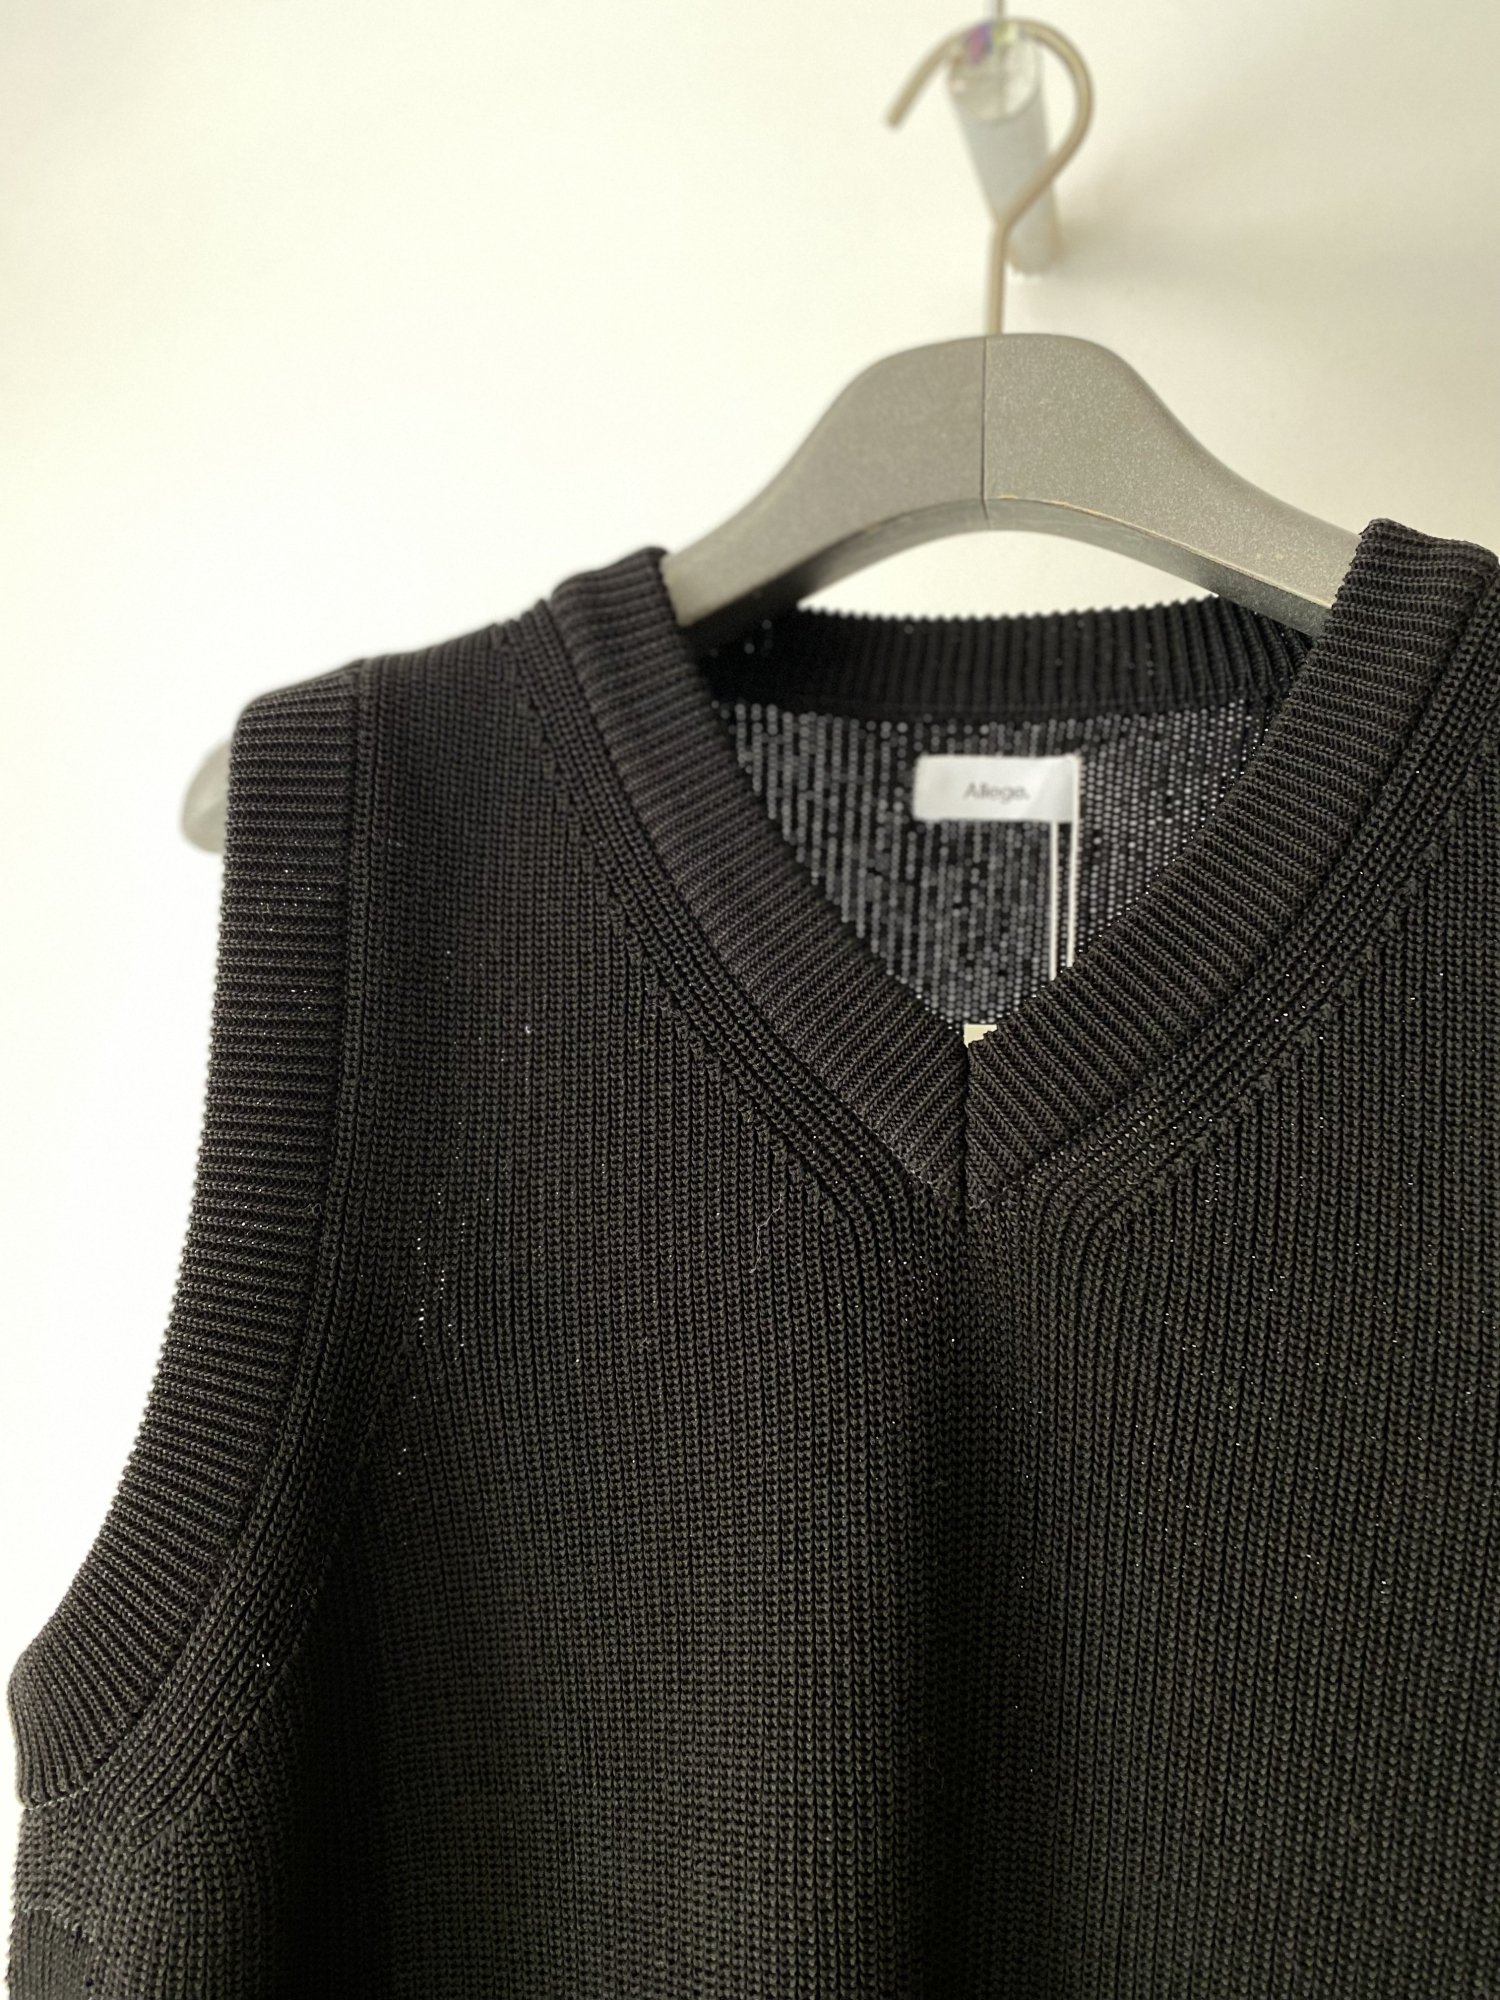 ALLEGE<br />Knit Vest / BLACK<img class='new_mark_img2' src='https://img.shop-pro.jp/img/new/icons14.gif' style='border:none;display:inline;margin:0px;padding:0px;width:auto;' />